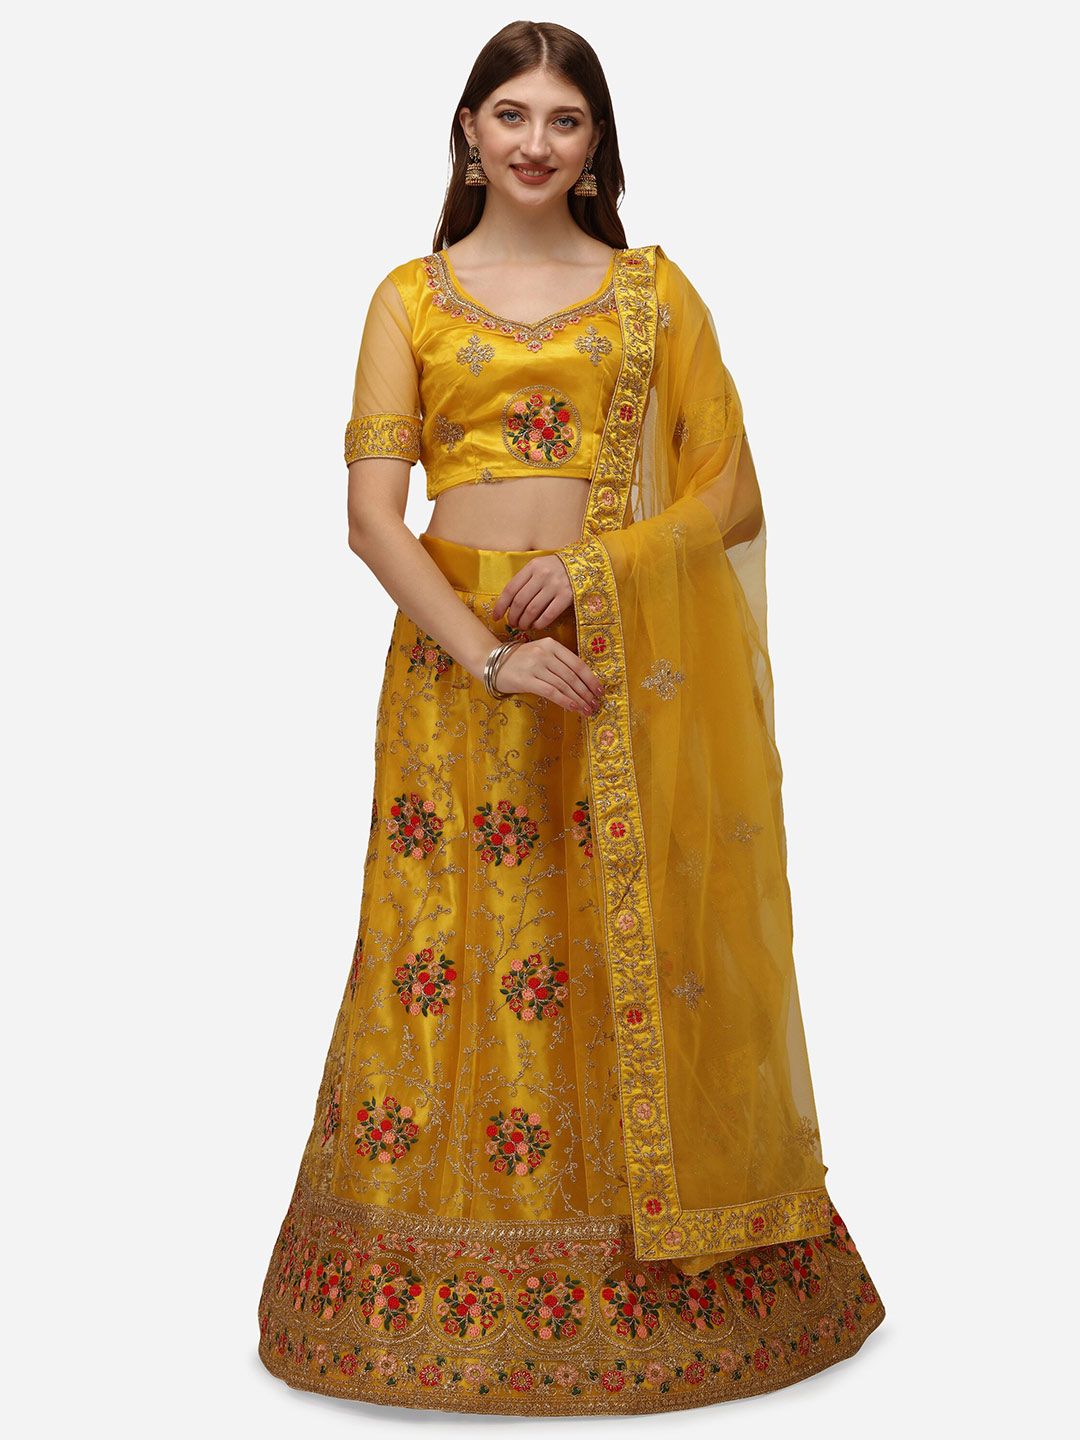 Netram Yellow Embroidered Semi-Stitched Lehenga & Unstitched Choli With Dupatta Price in India